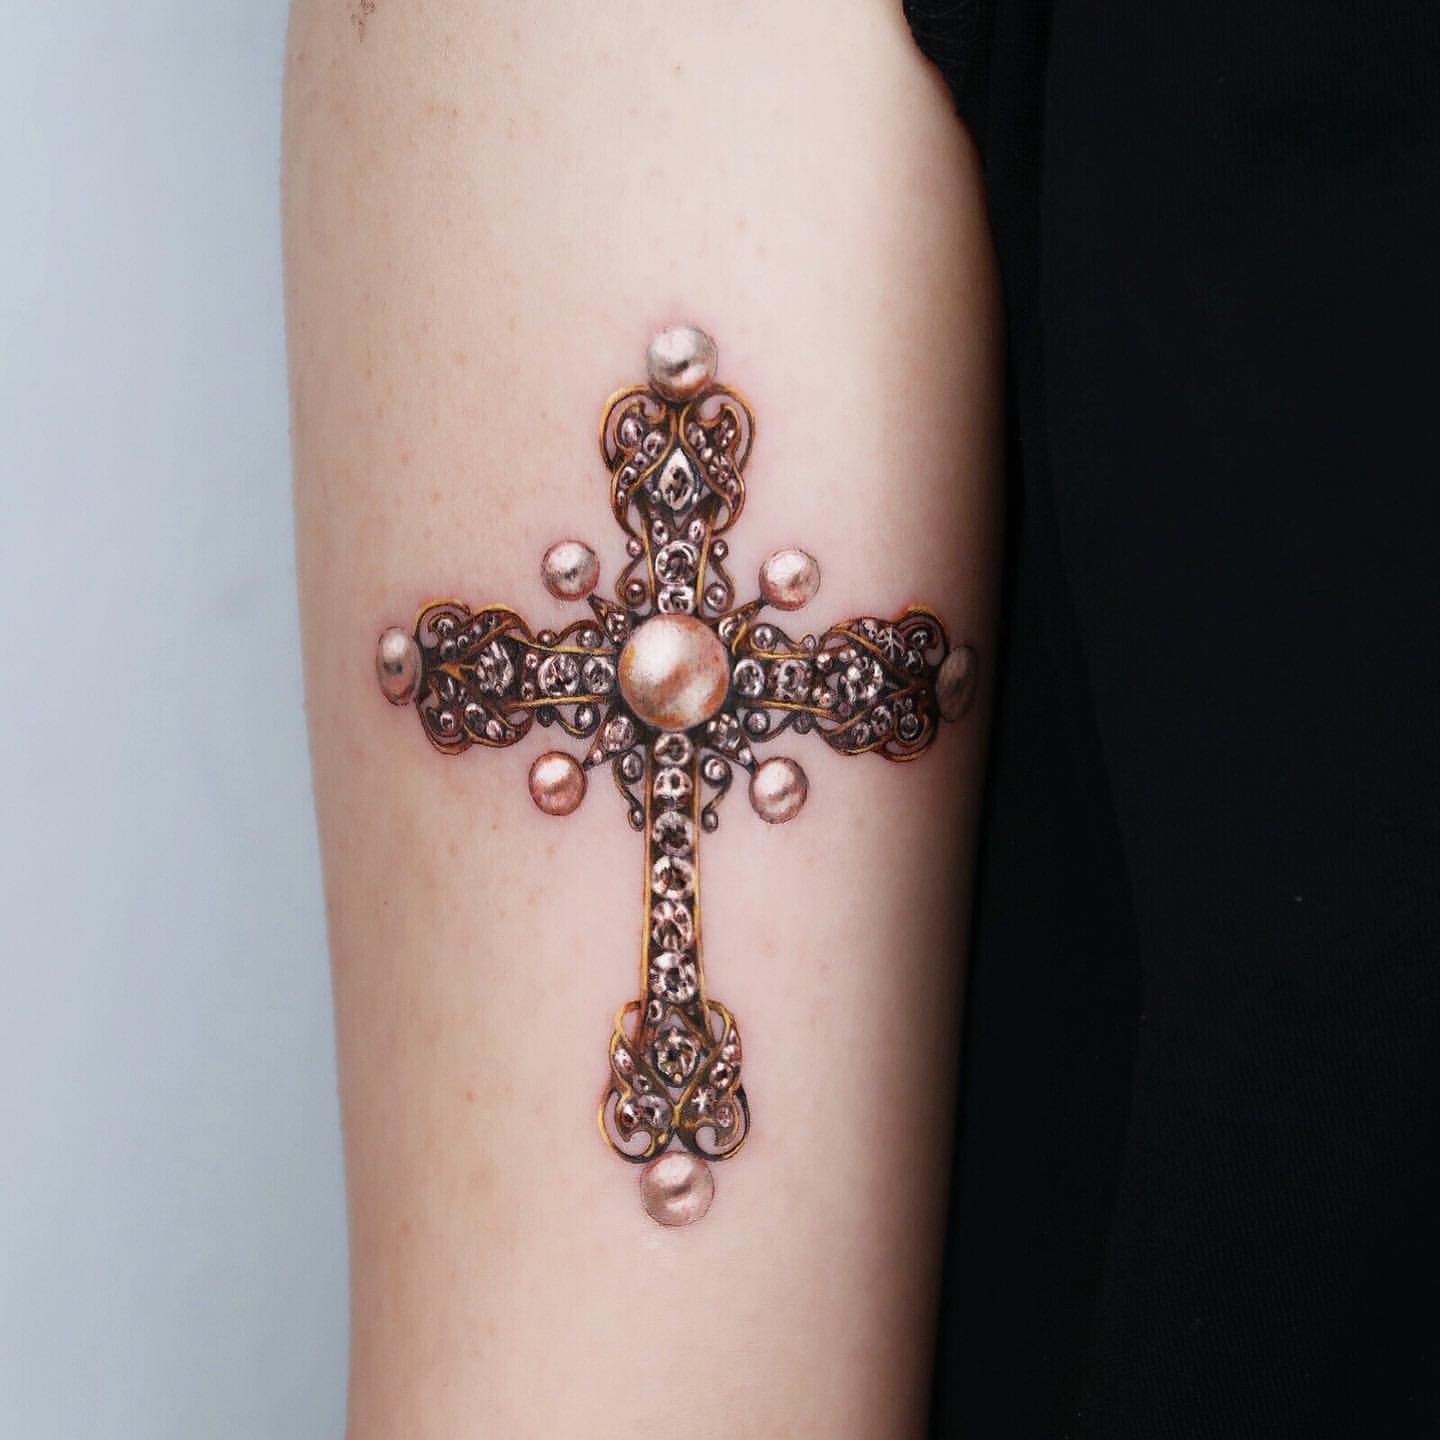 Small Tattoos for Women 41